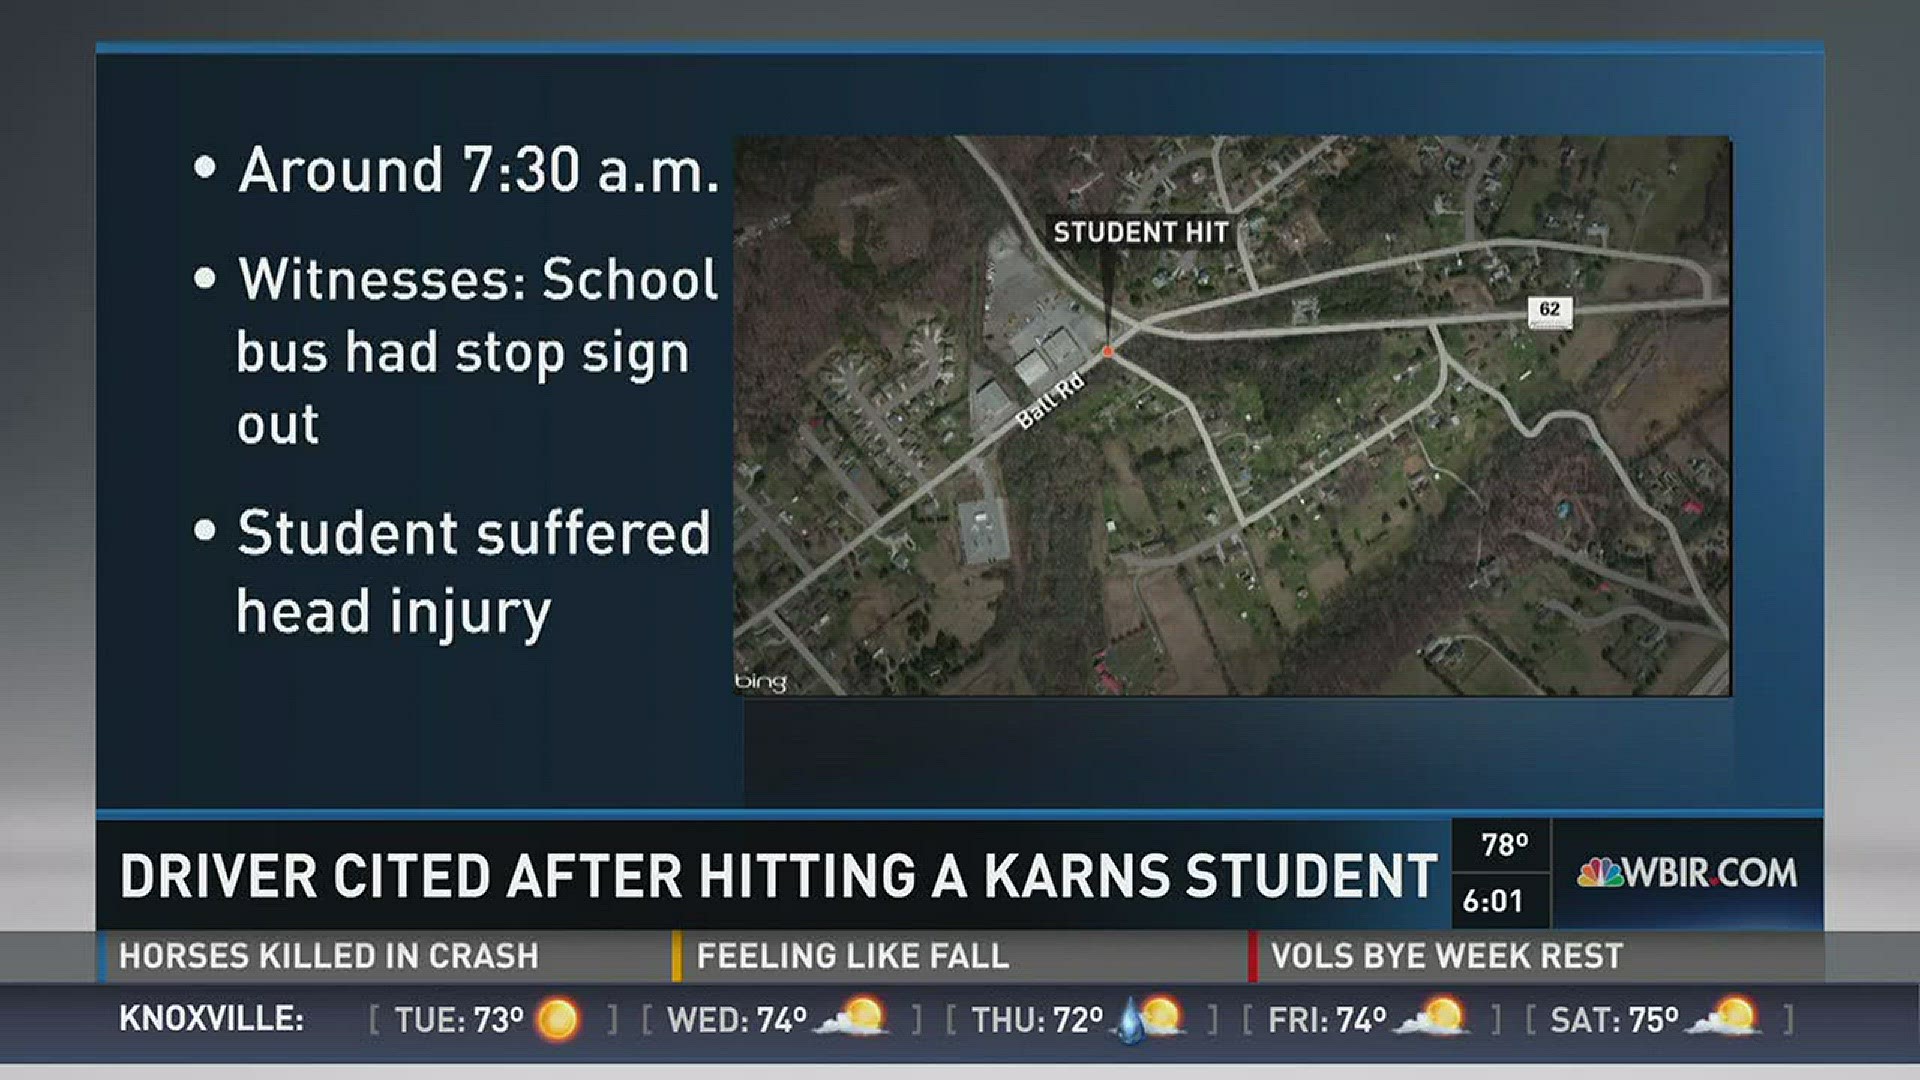 Oct. 24, 2016: A Karns High School student was taken to the hospital after an SUV hit her while she tried to get on the school bus.